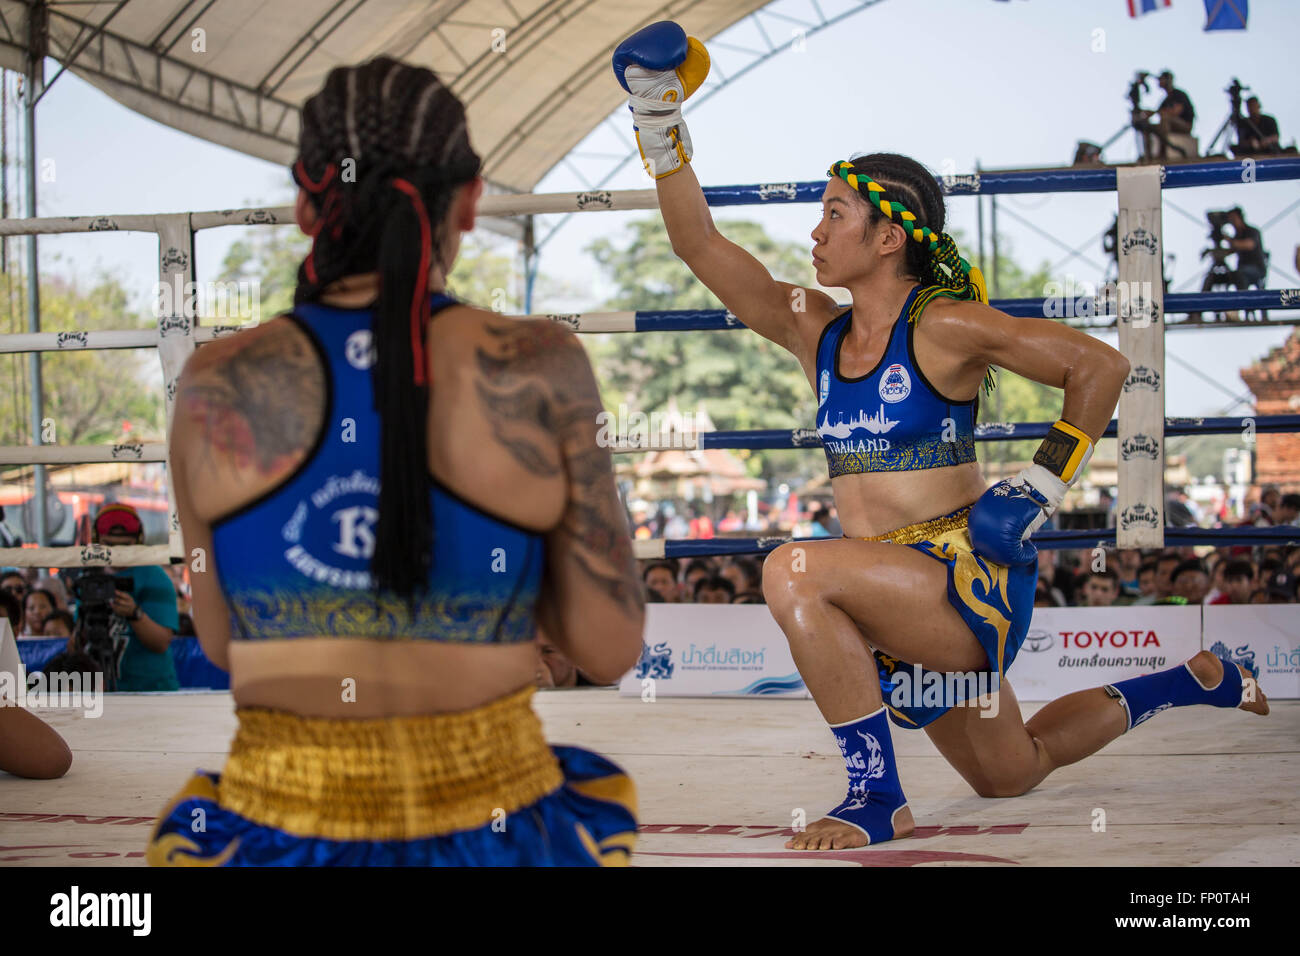 Ayutthaya, Thailand. 17th Mar, 2016. Women performing a ritual dance before the fight during the 12th World Wai Kru Muay Thai Ceremony. The 12th World Wai Kru Muay Thai Ceremony is being held near the famous Wat Maha That Temple in Ayutthaya Historical Park and attract every year more than 1200 Muay Thai fighters from 57 countries to showcase some of the sacred martial art rituals of Muay Thai Boxing. © Guillaume Payen/ZUMA Wire/Alamy Live News Stock Photo